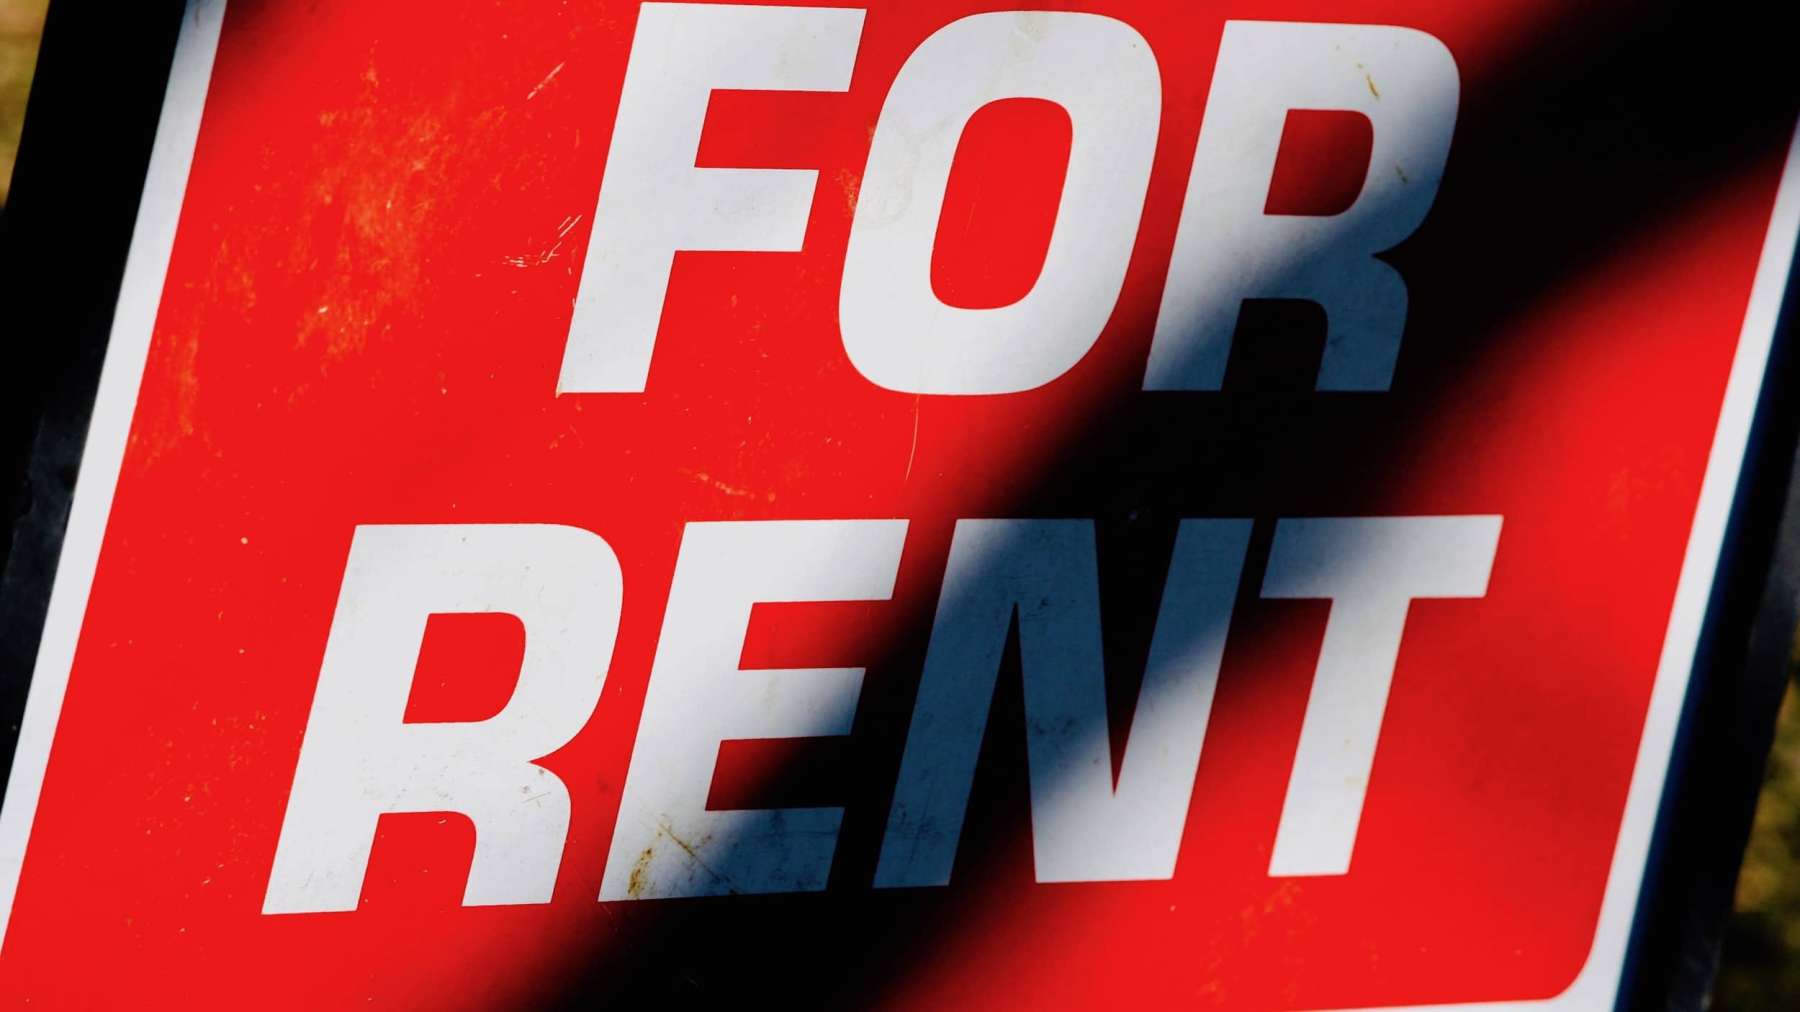 Rhode Island’s slow and nonexistent action on rental and housing assistance is cruel